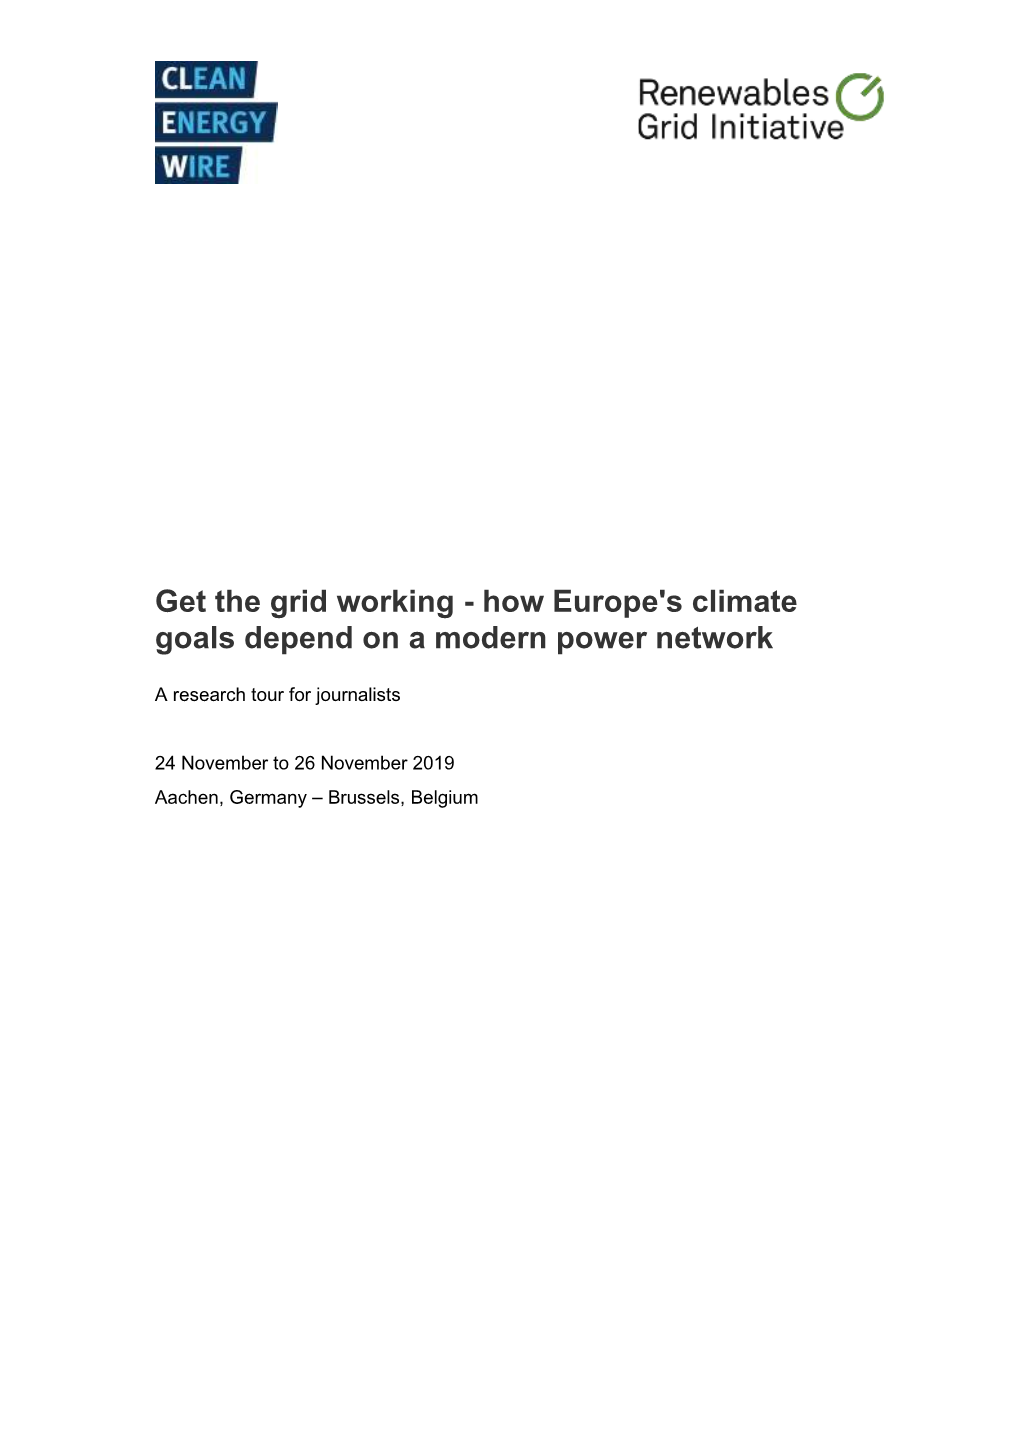 Get the Grid Working - How Europe's Climate Goals Depend on a Modern Power Network